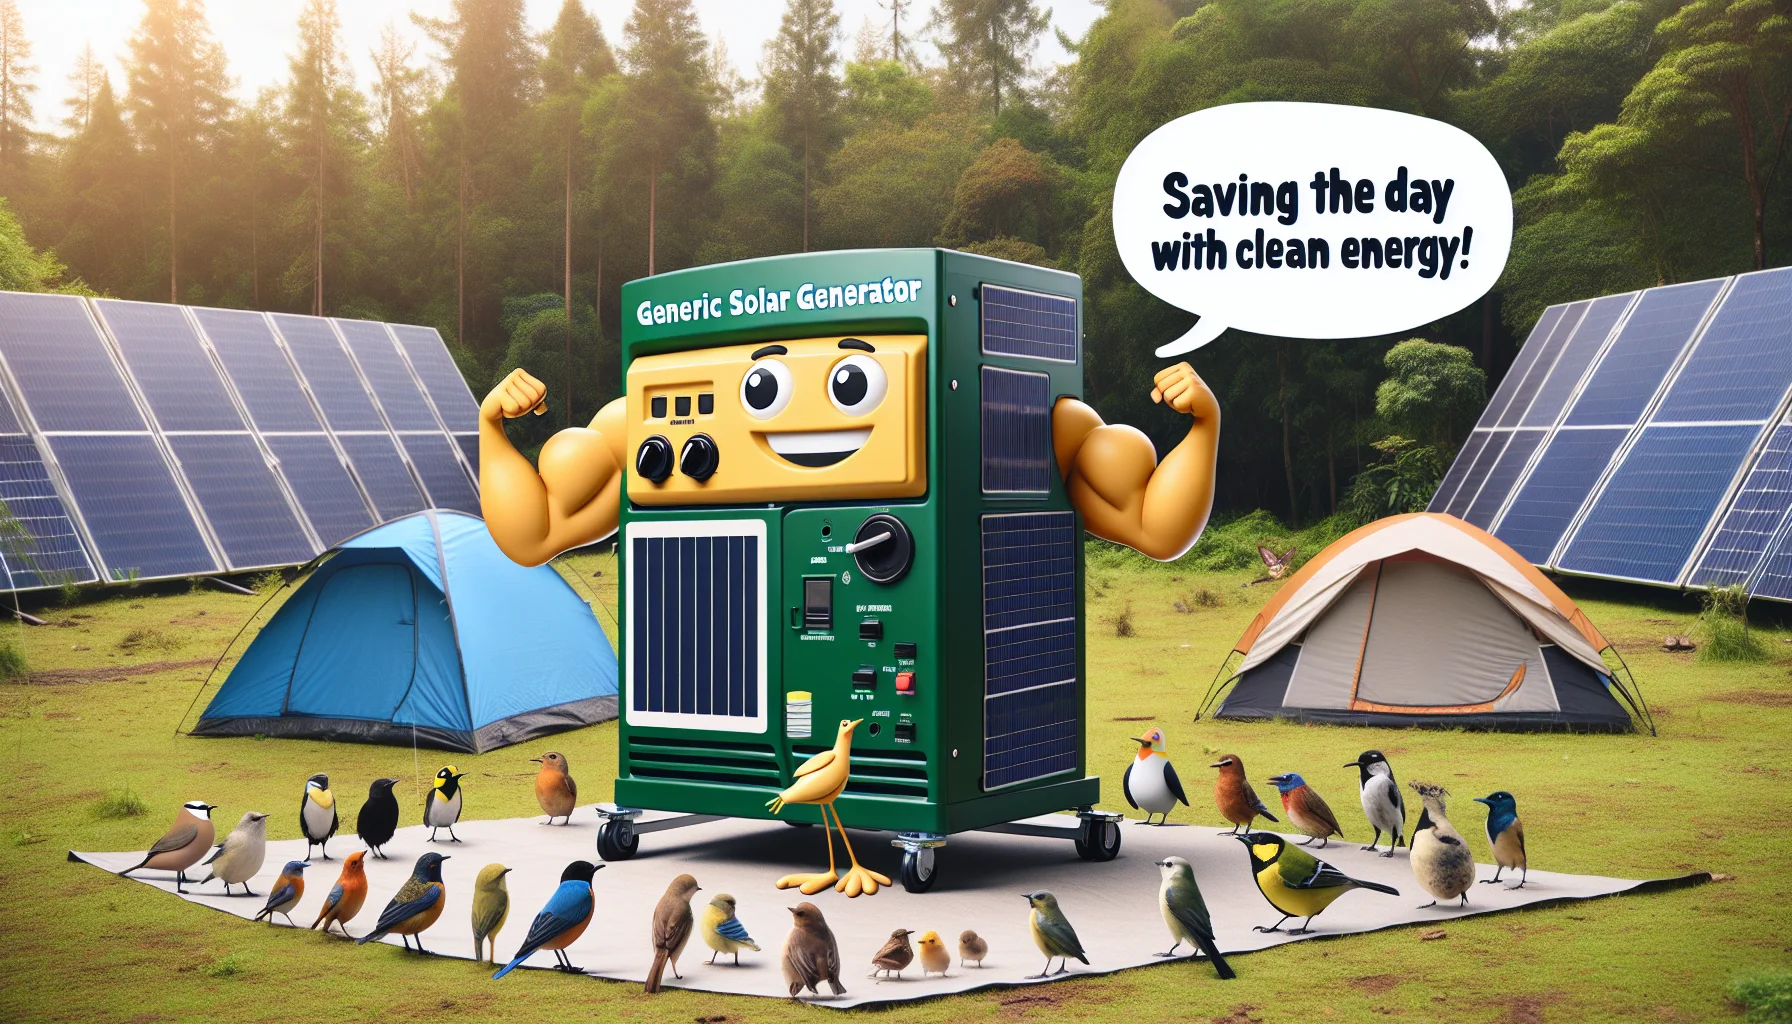 Create a humorous and eye-catching image of a generic solar generator, laid out in a daytime campsite amidst lush greenery. The equipment should be animated to express lively human-like features, perhaps with a confident smile and flexing its 'solar panels' as if they were muscles, making an impressive display to a group of variety of birds, insects, and small forest animals standing there in awe of its strength. Speech bubbles around the solar generator can say 'Saving the day with clean energy!'. This should create a fun impression that generating electricity can be environmentally friendly and practical.